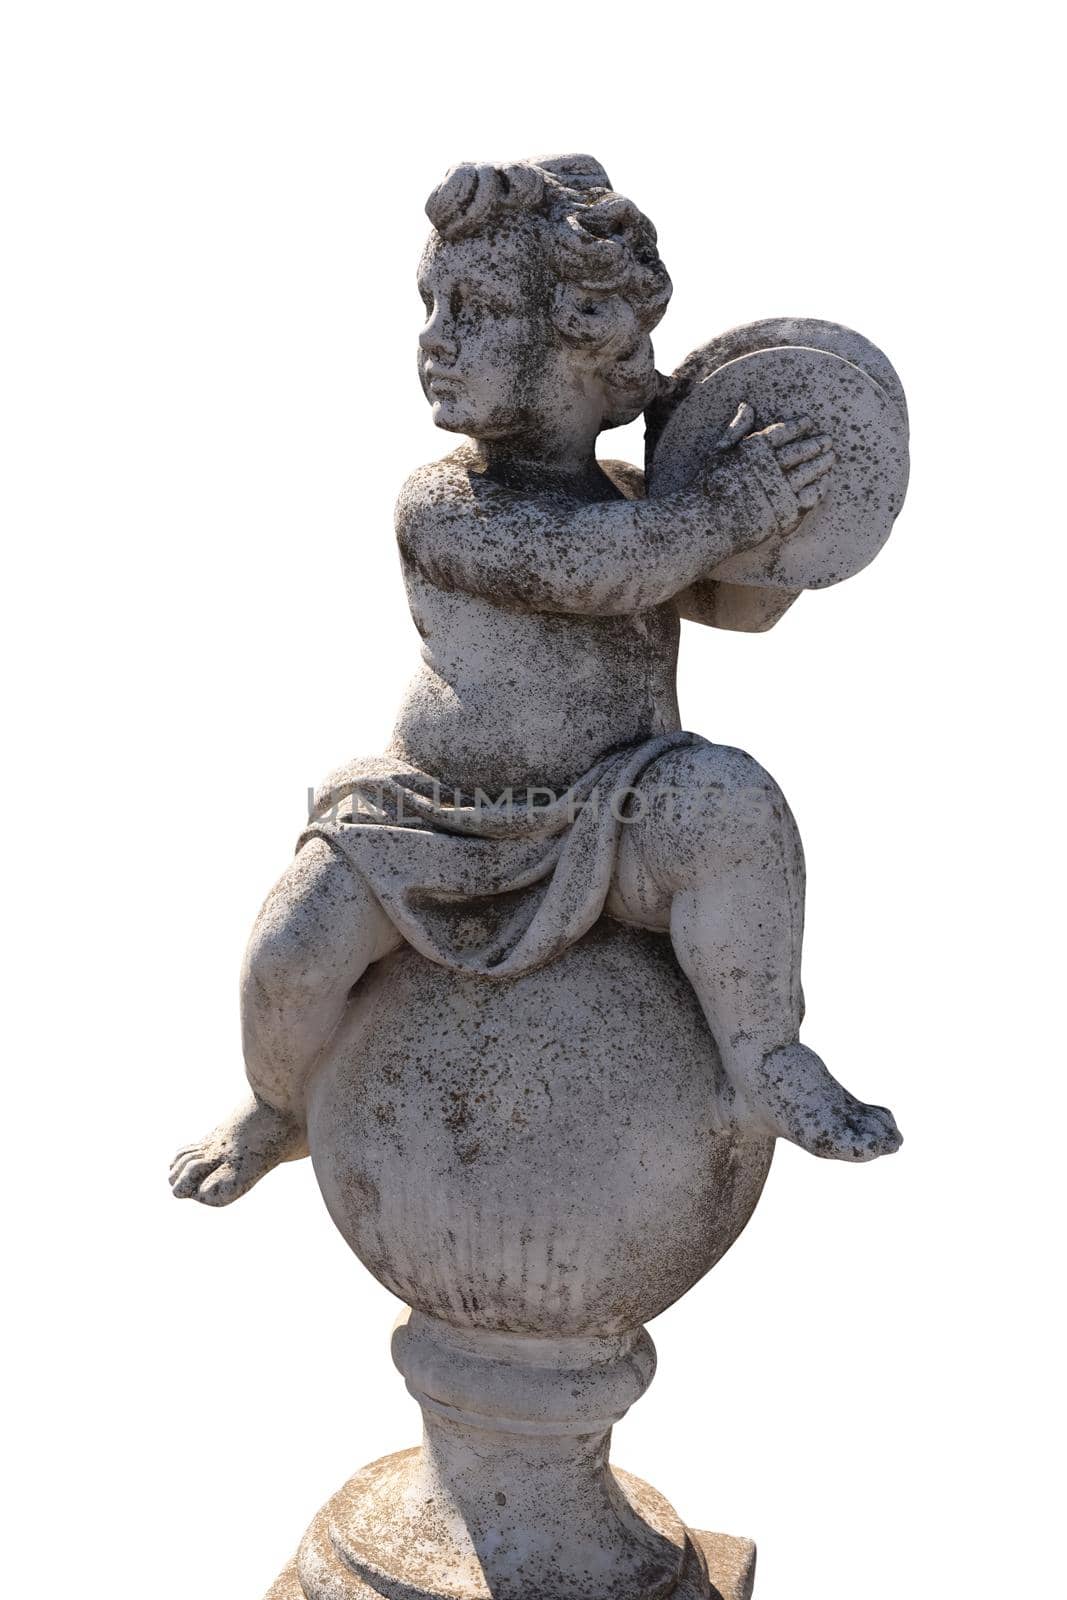 Ancient stone sculpture of naked cherub playing cymbals on white background. art and classical style romantic figurative stone sculpture.